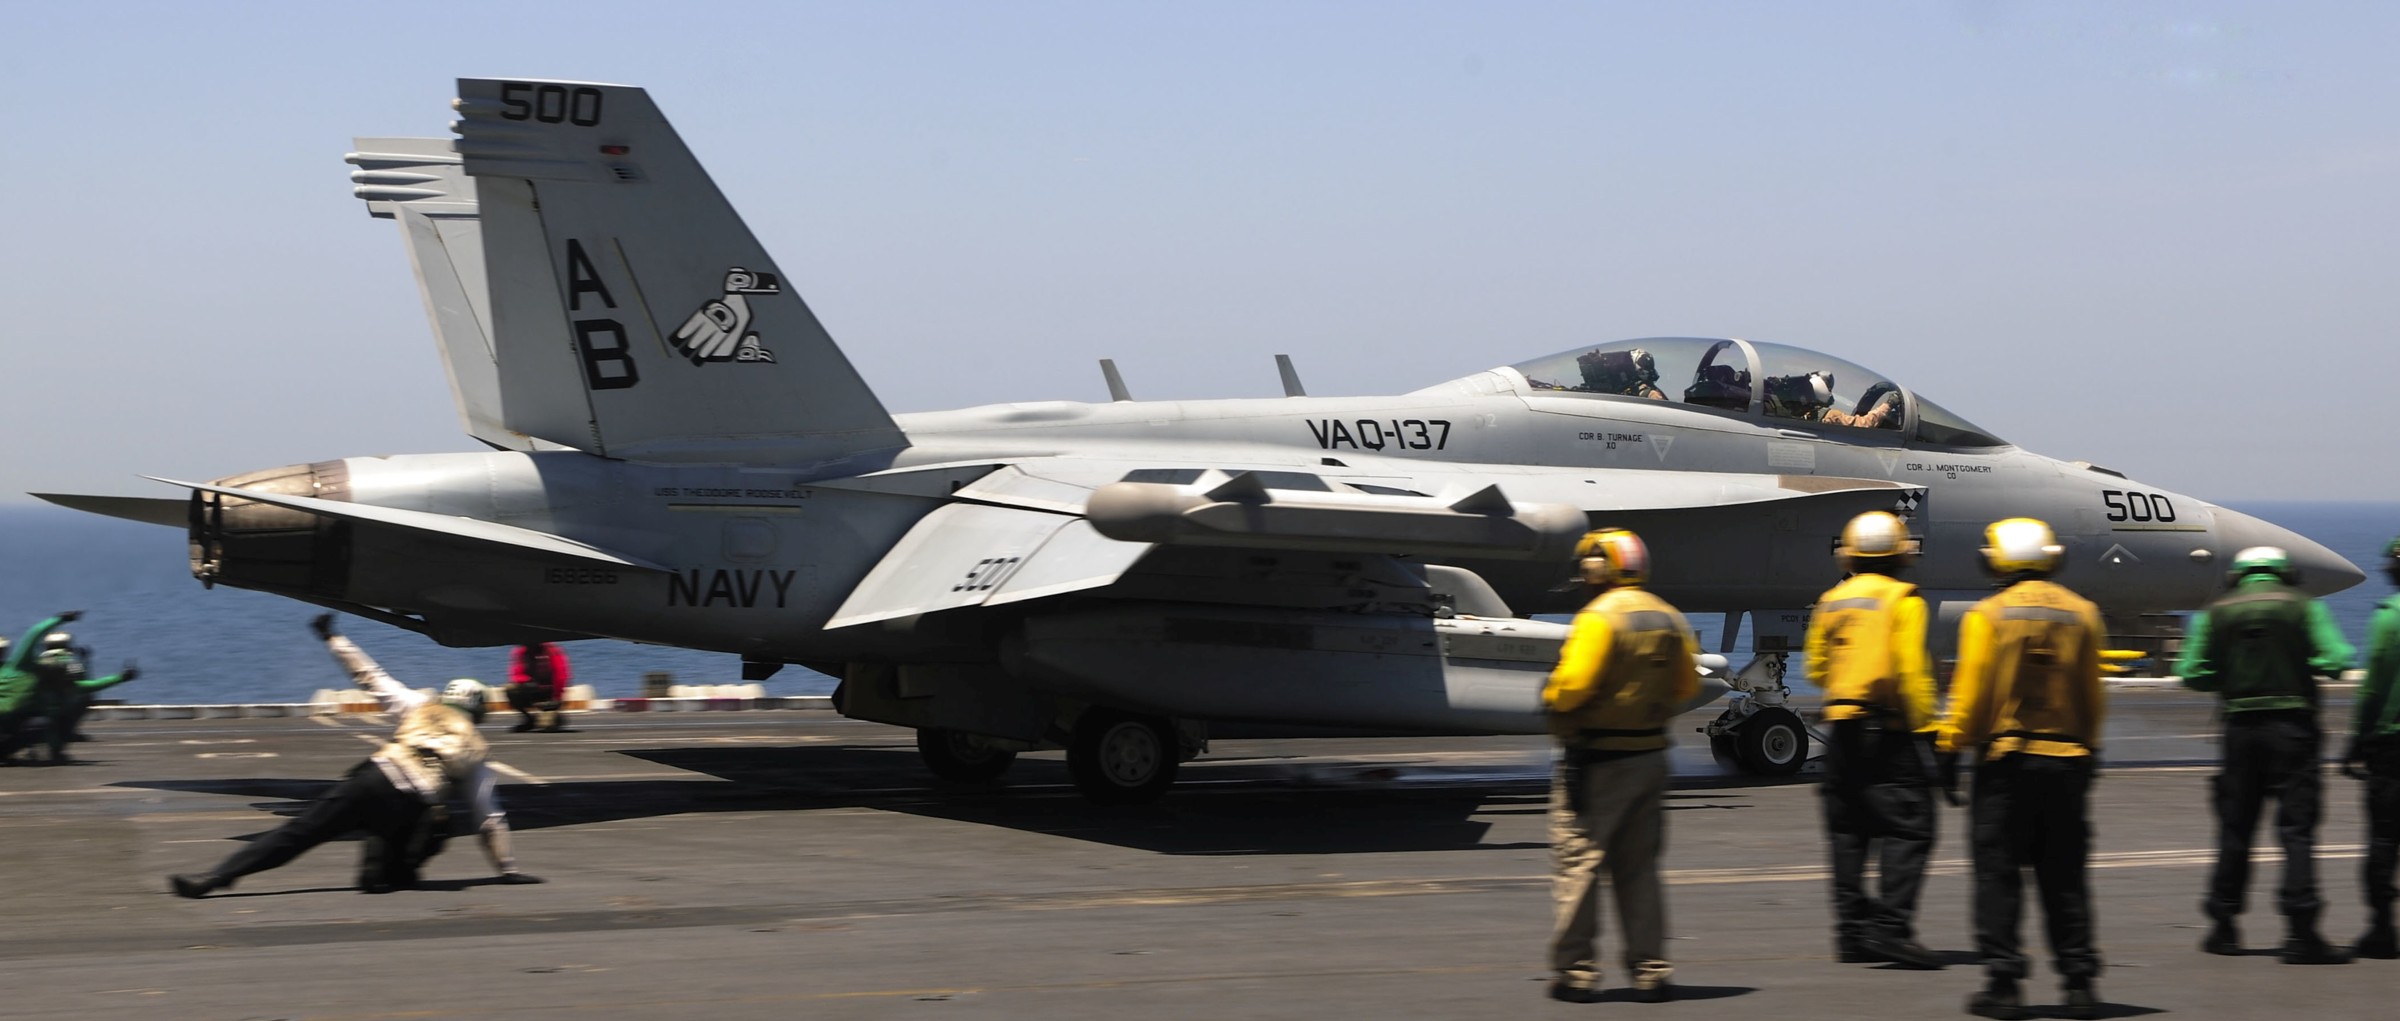 vaq-137 rooks electronic attack squadron us navy ea-18g growler carrier air wing cvw-1 uss theodore roosevelt cvn-71 48